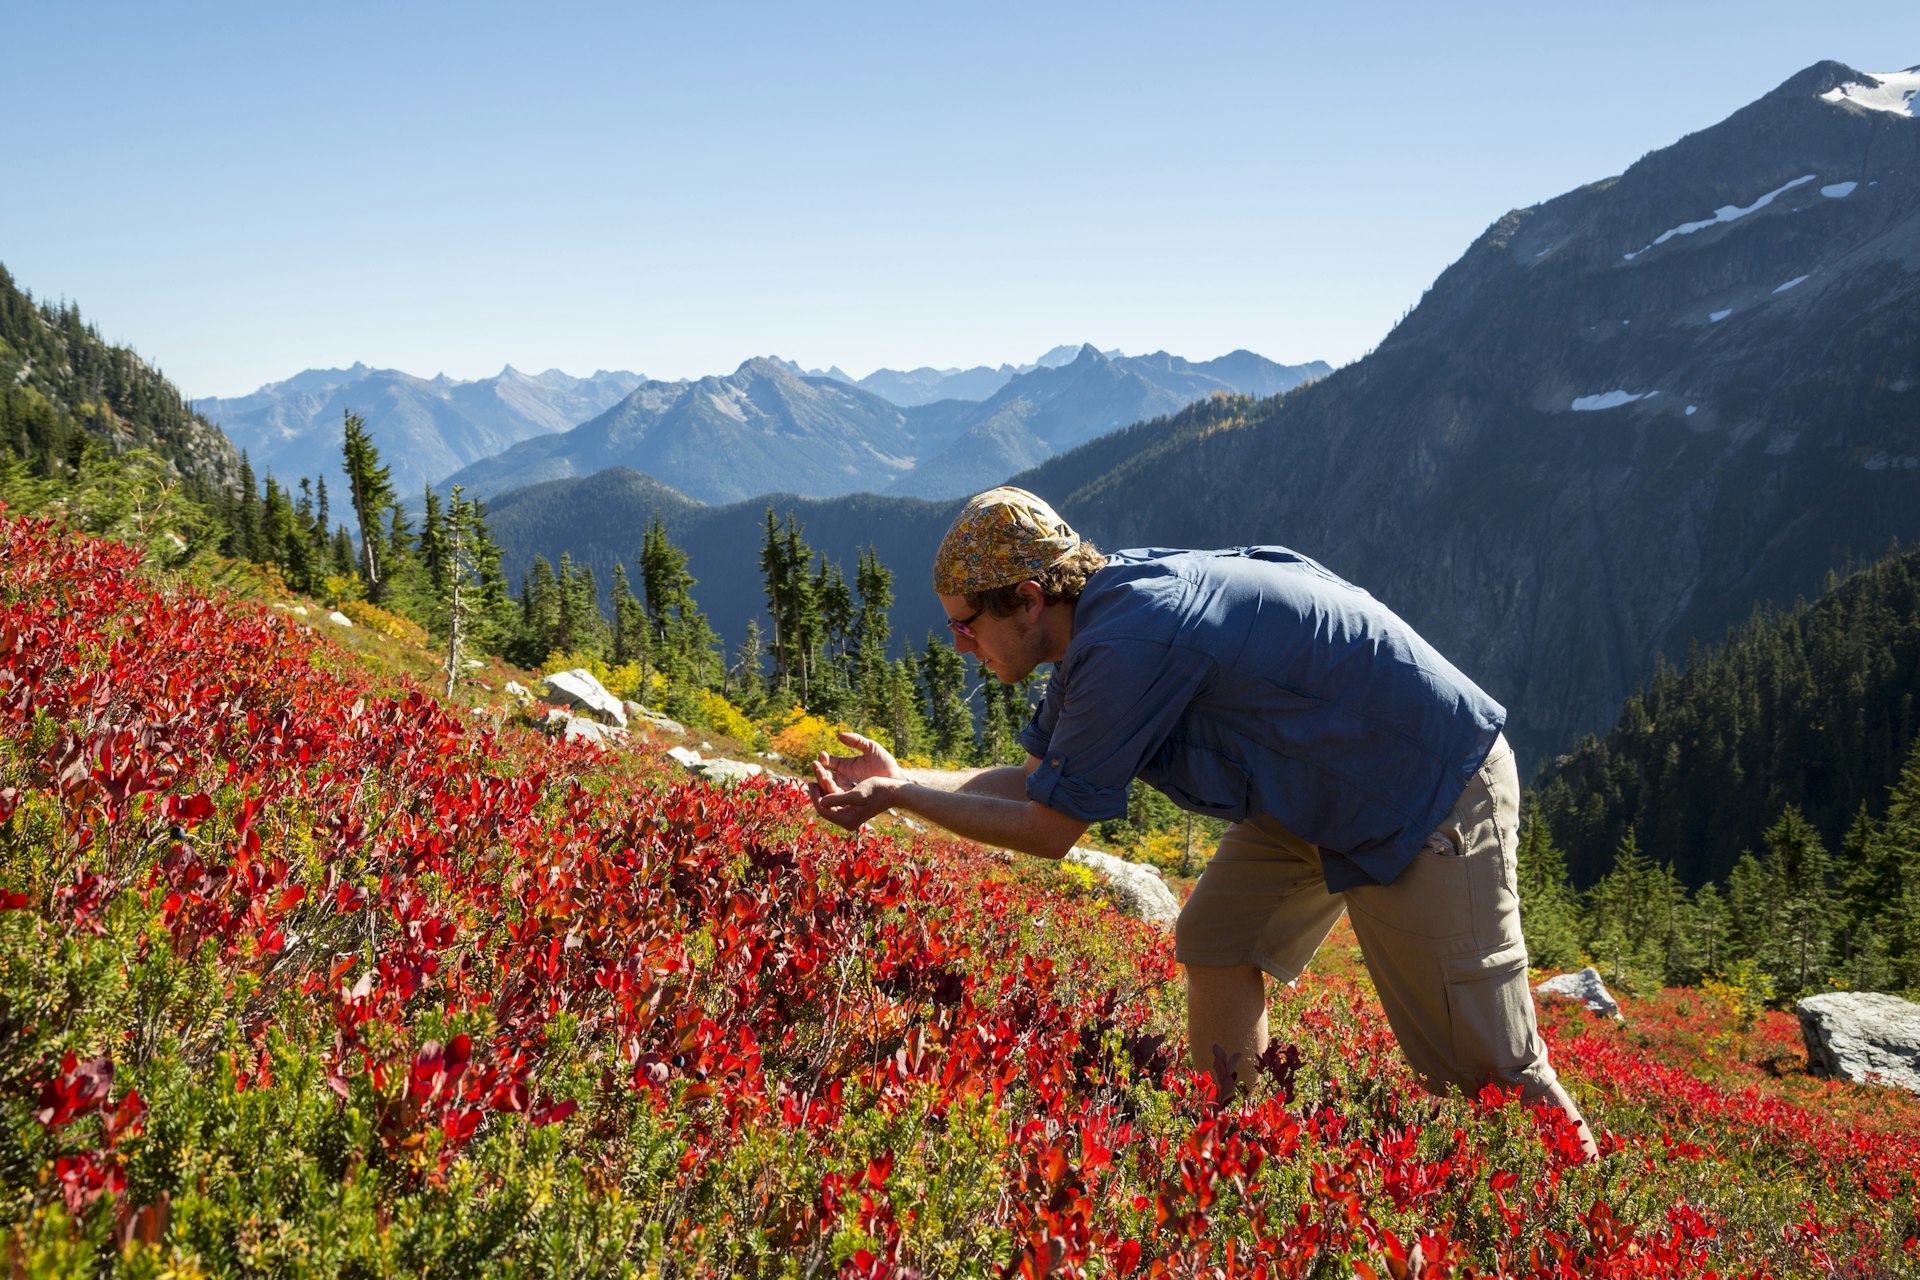 A hiker refuels with wild blueberries at North Cascades National Park, Washington